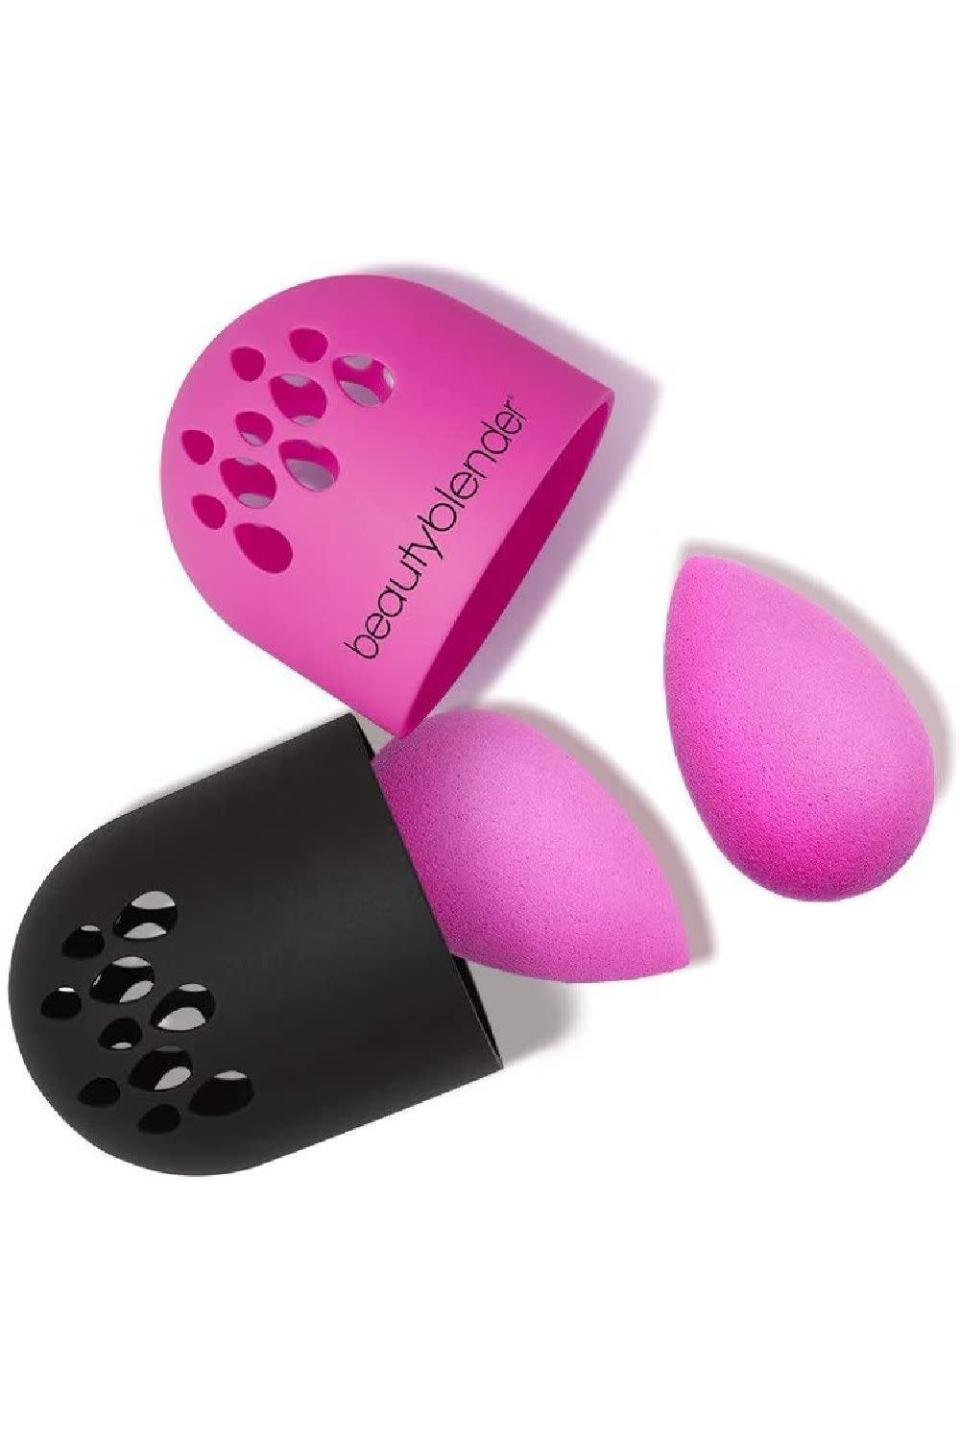 <p><strong>beautyblender</strong></p><p>amazon.com</p><p><strong>$10.20</strong></p><p><a href="https://www.amazon.com/dp/B07HGH4LS1?tag=syn-yahoo-20&ascsubtag=%5Bartid%7C10055.g.38414112%5Bsrc%7Cyahoo-us" rel="nofollow noopener" target="_blank" data-ylk="slk:Shop Now" class="link rapid-noclick-resp">Shop Now</a></p><p>If you typically toss your dirty, damp beauty blender in your messy makeup bag when you're finished with it, you're just asking for breakouts. Store your clean makeup sponge in this breathable rubber case that allows your sponge to dry while keeping it protected.</p>